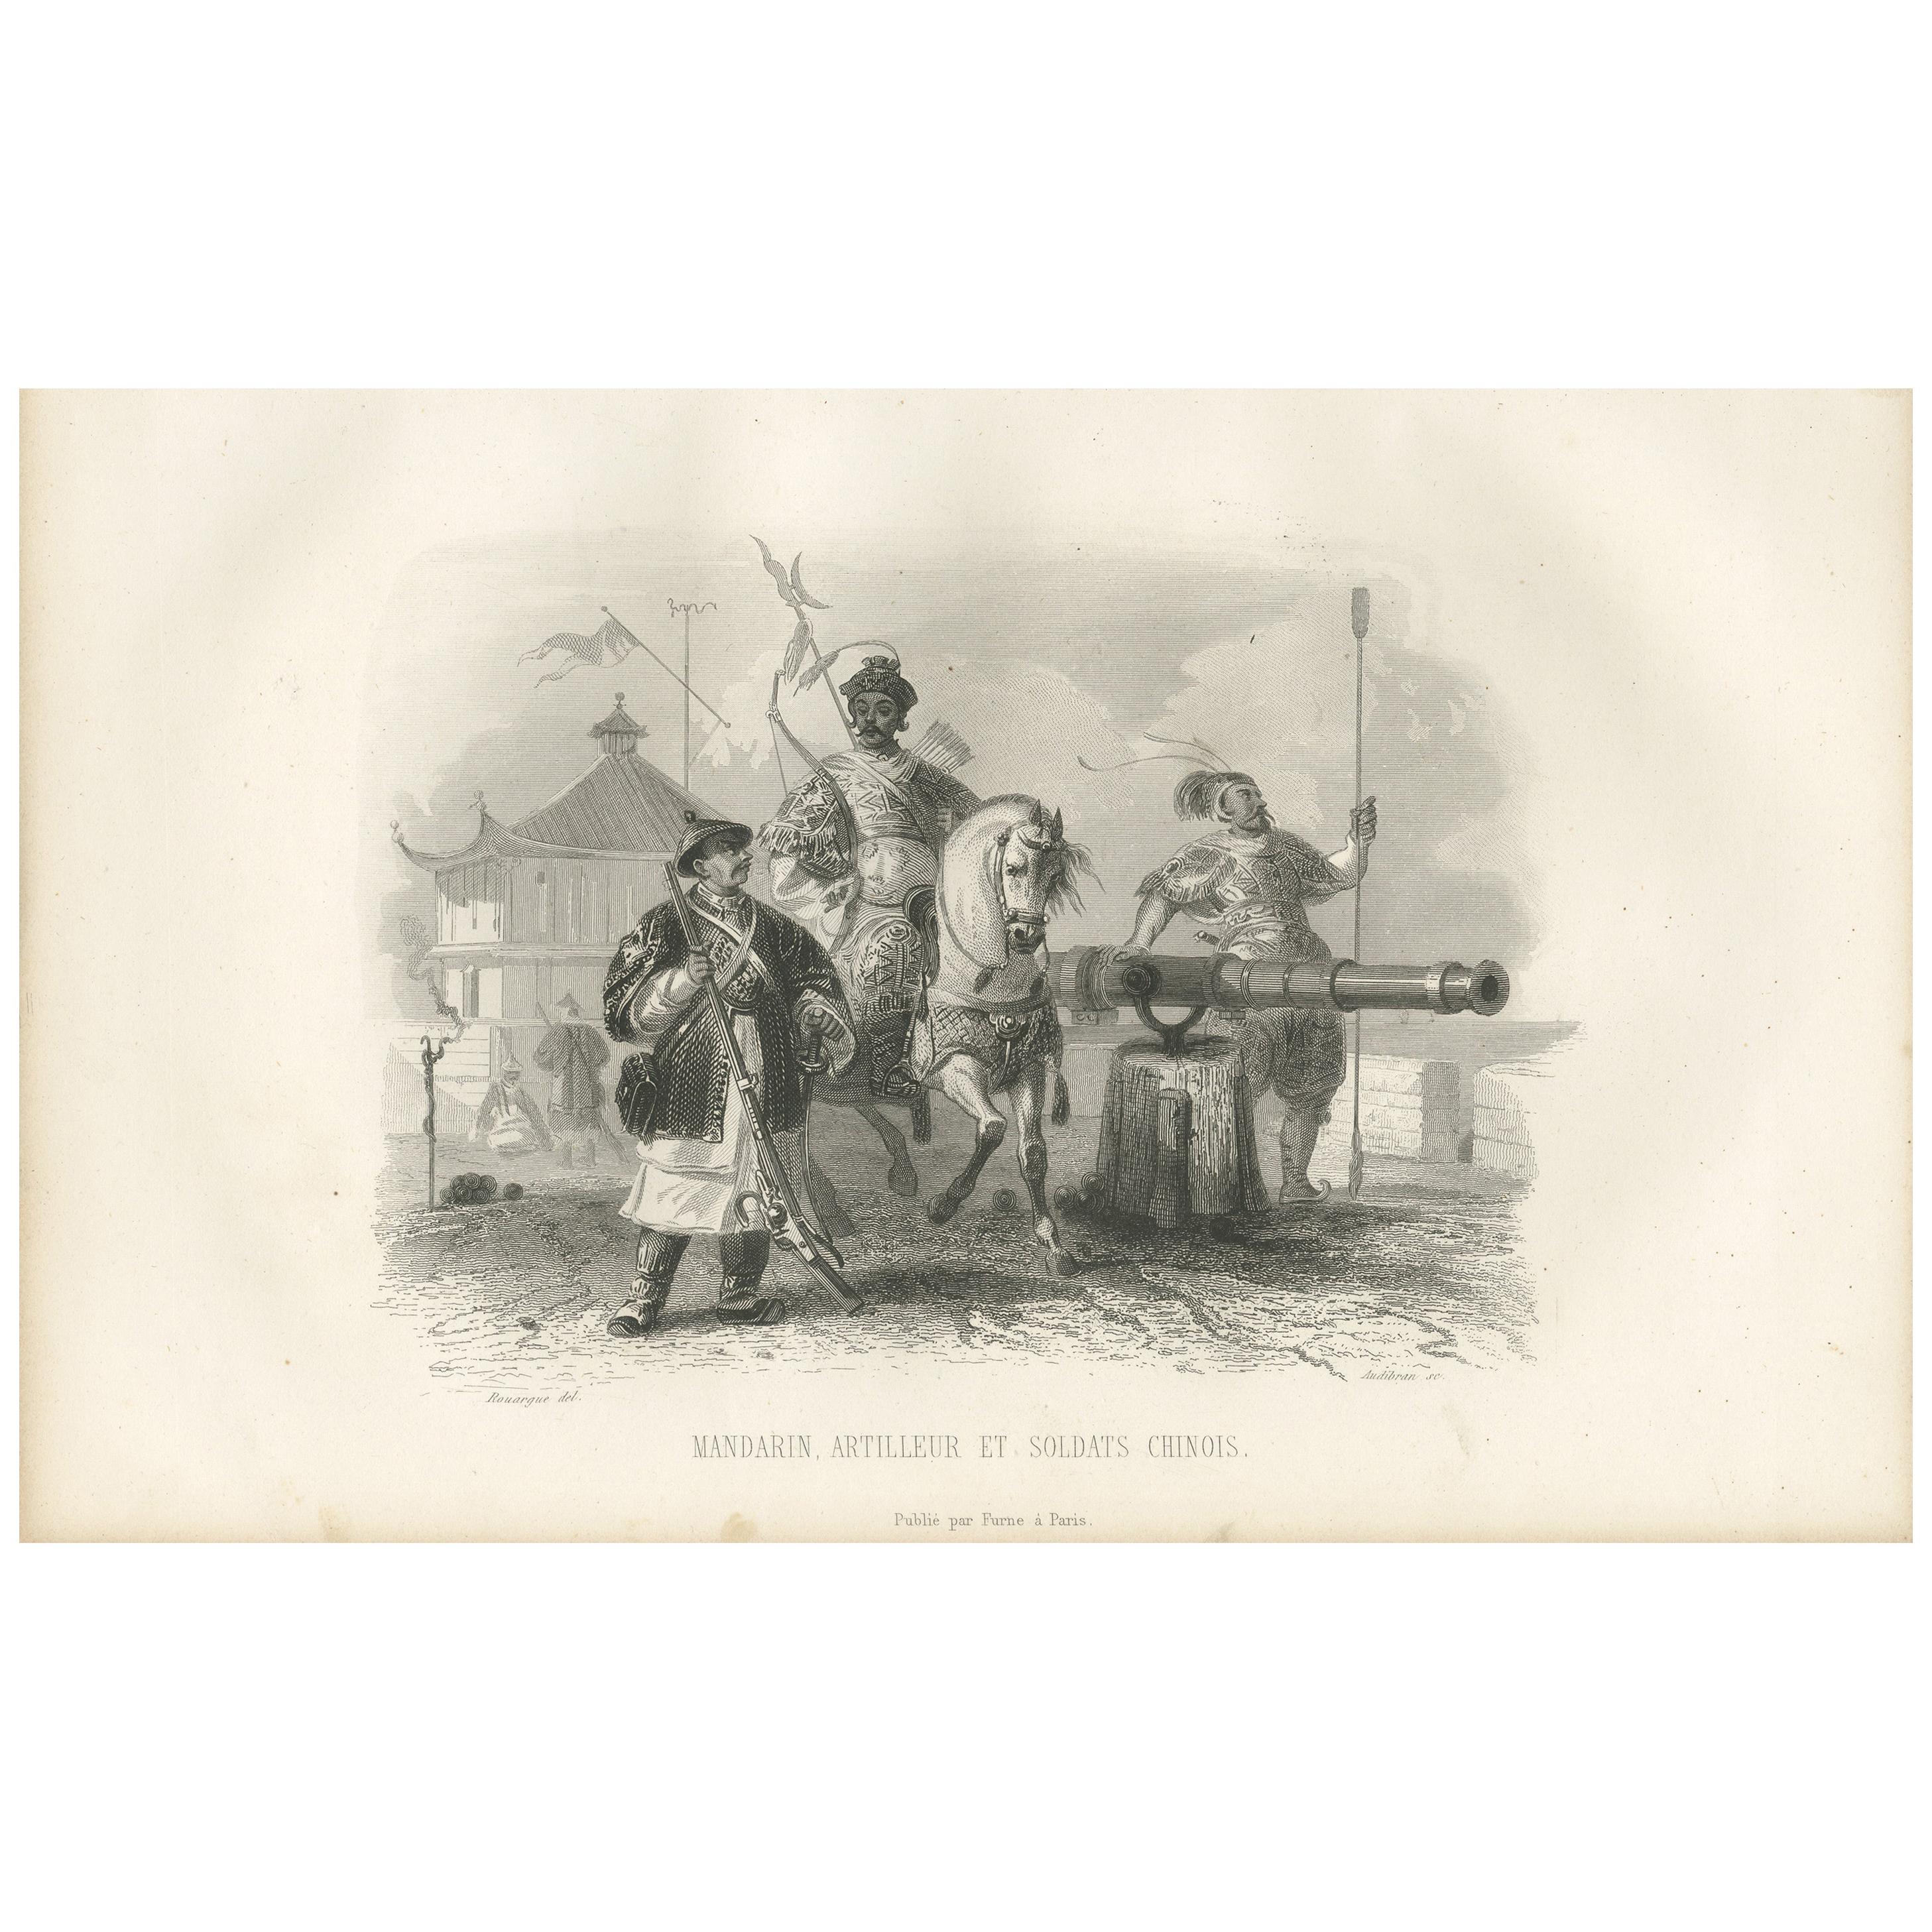 Antique Print of Chinese Soldiers by D'Urville (1853)